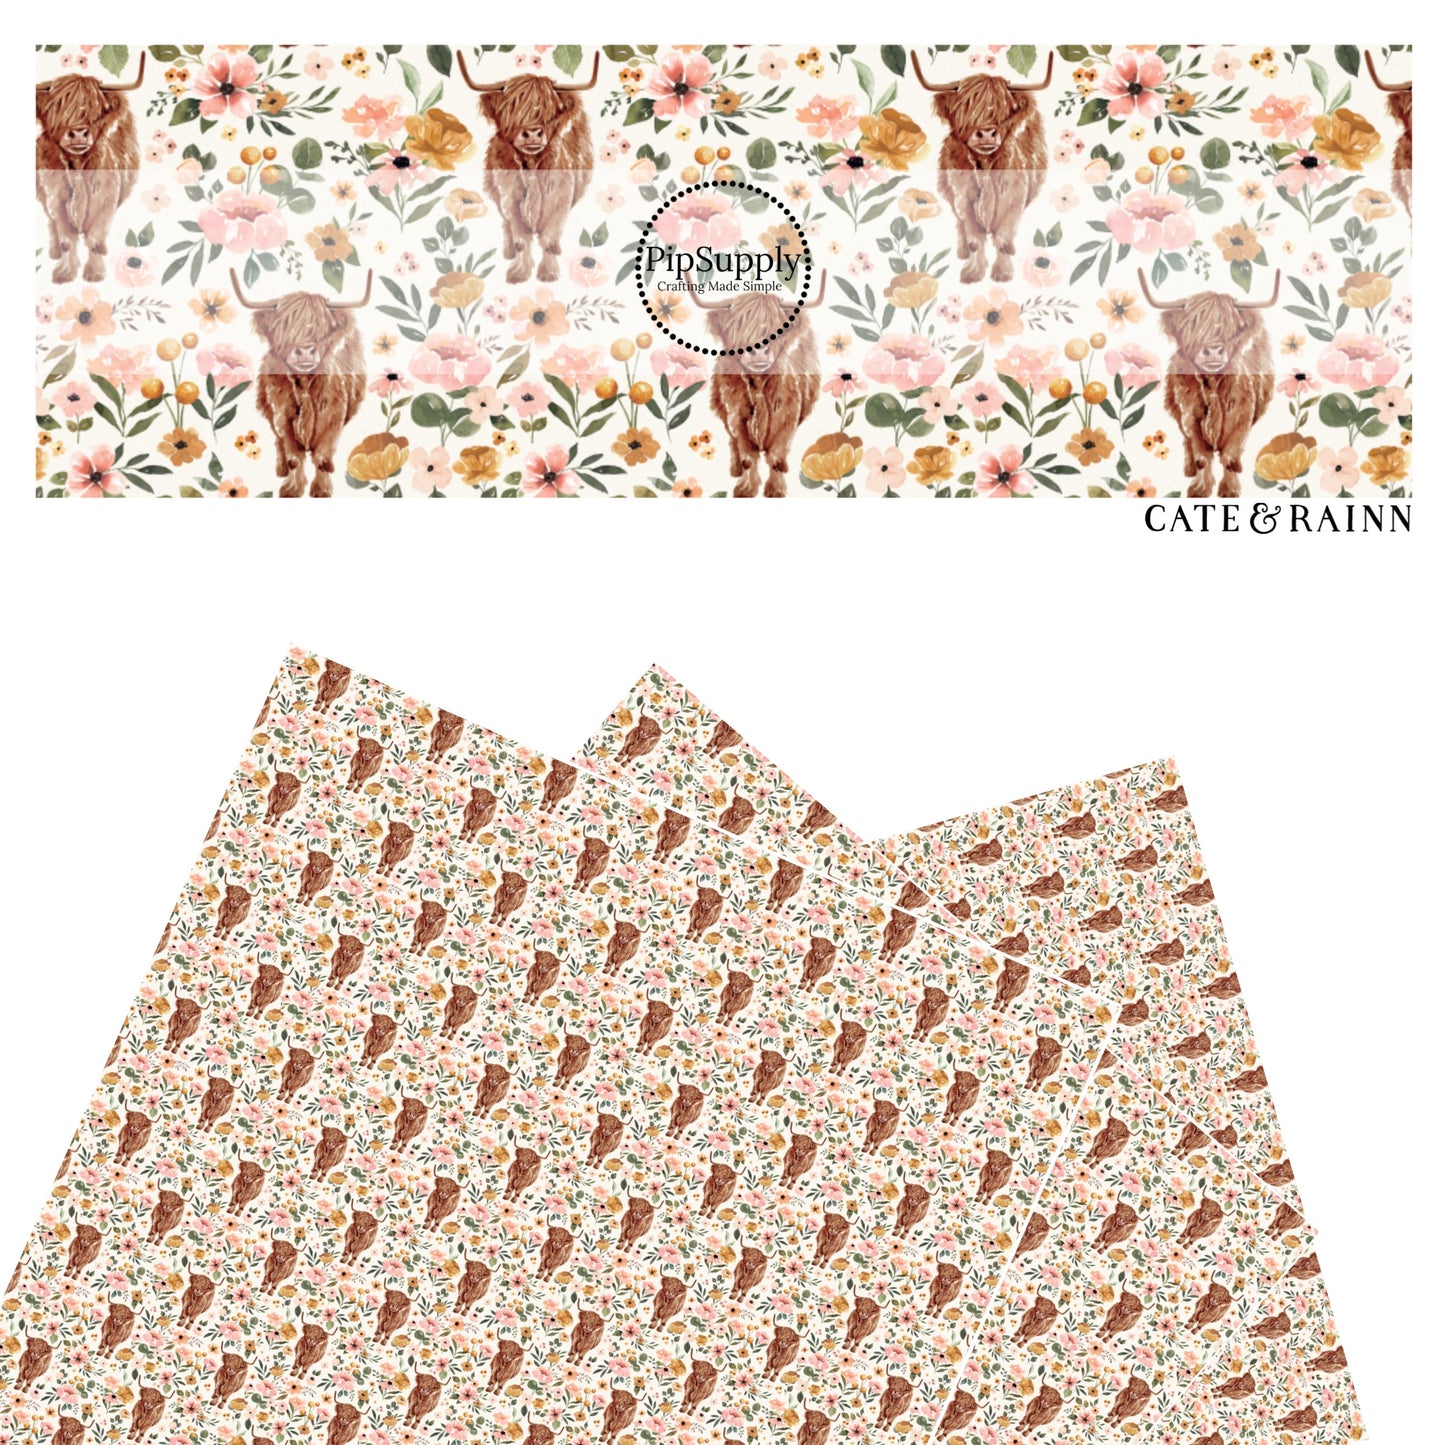 These spring floral pattern themed faux leather sheets contain the following design elements: highland cows surrounded by pink and yellow flowers. Our CPSIA compliant faux leather sheets or rolls can be used for all types of crafting projects.